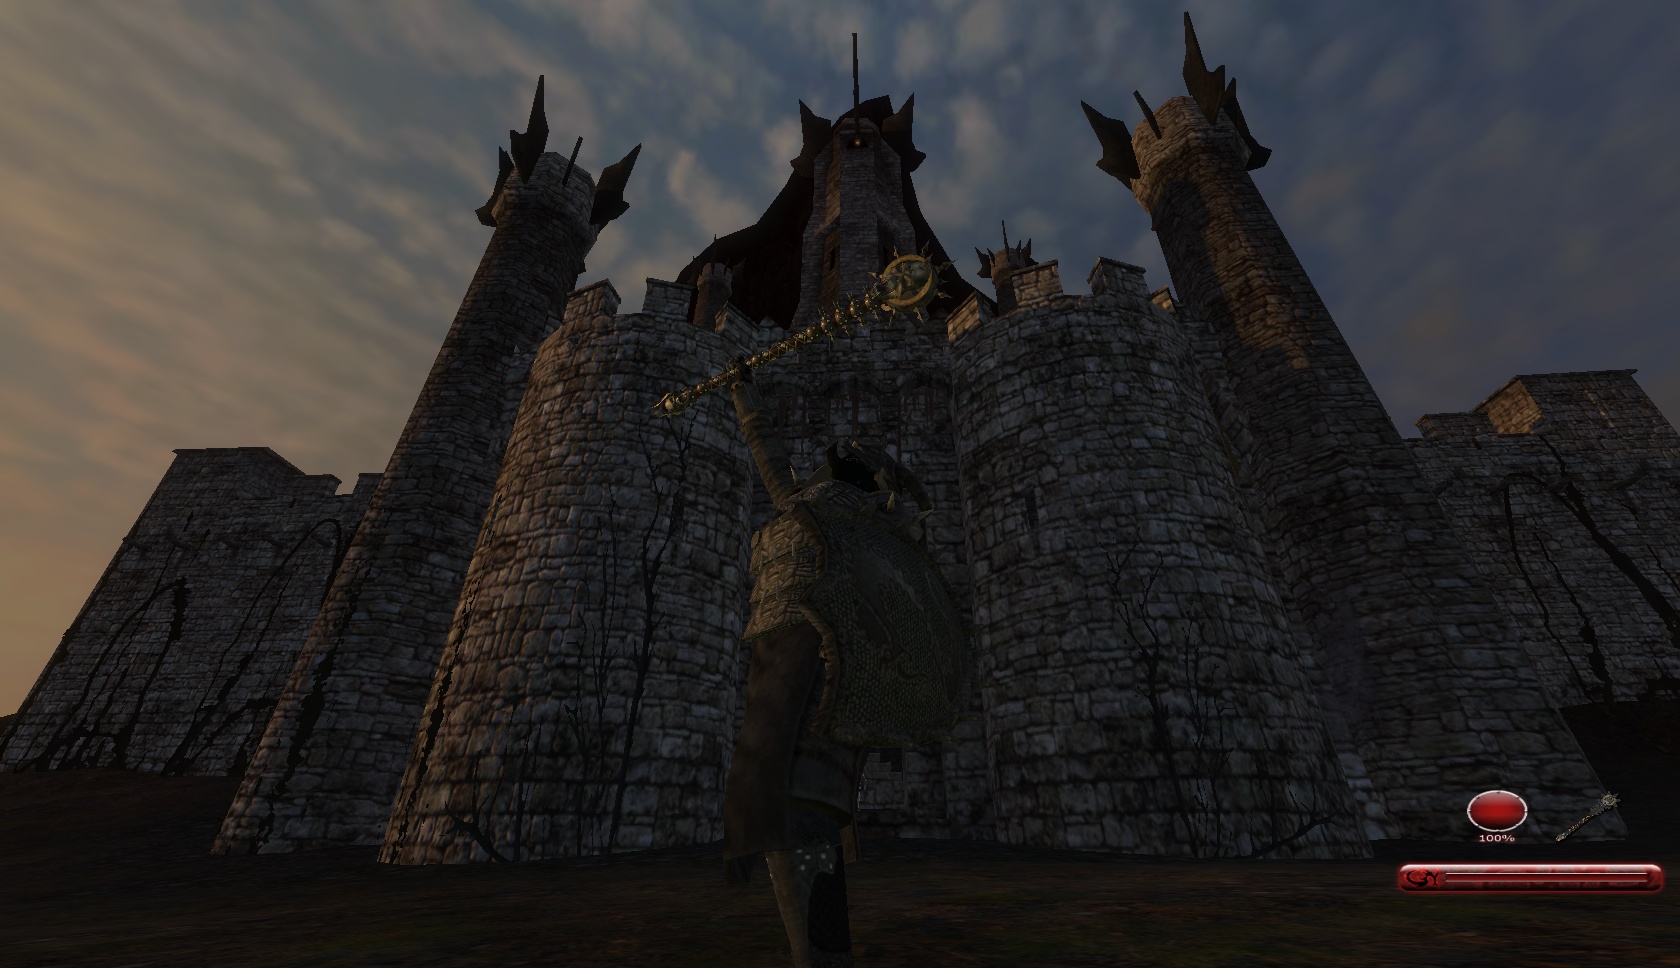 rise of the undead mount and blade wiki